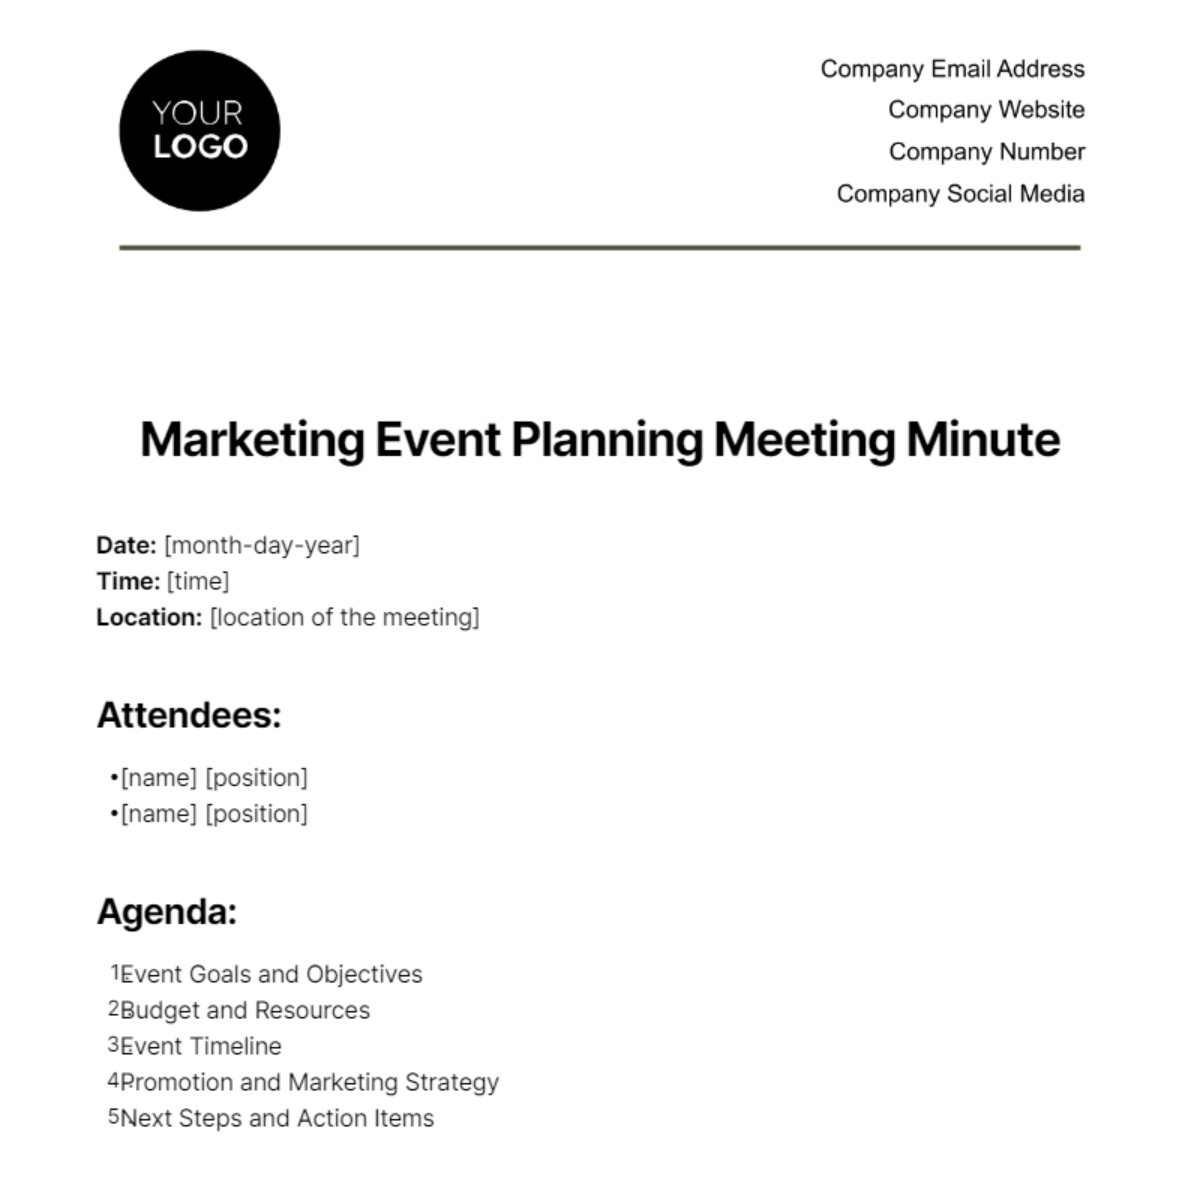 Marketing Event Planning Meeting Minute Template